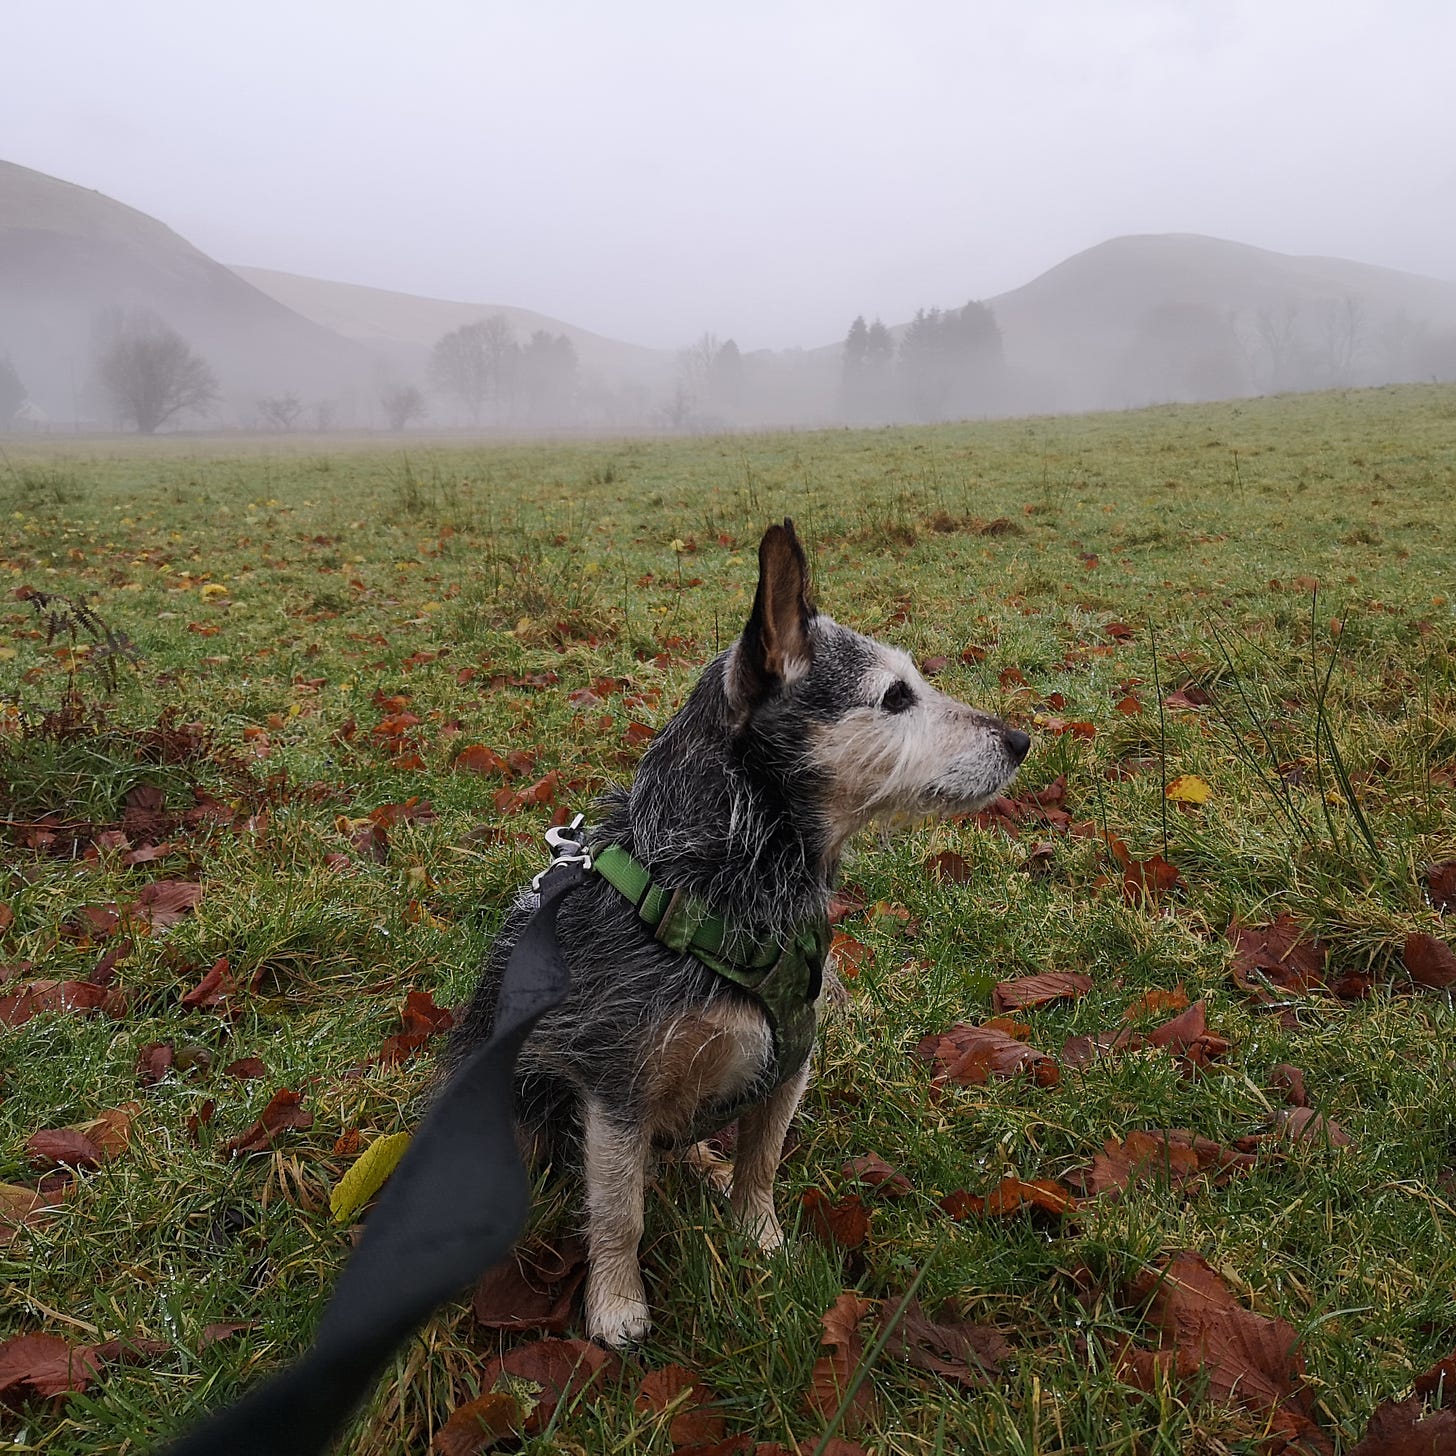 Image description: a tiny scruffy black and tan terrier sits in a damp field covered in fallen leaves, gazing off to right of frame. He is wearing a green harness and black lead, which is connected to the person taking the photo. In the background, an early morning mist hangs low in front of the trees and hills in the distance.